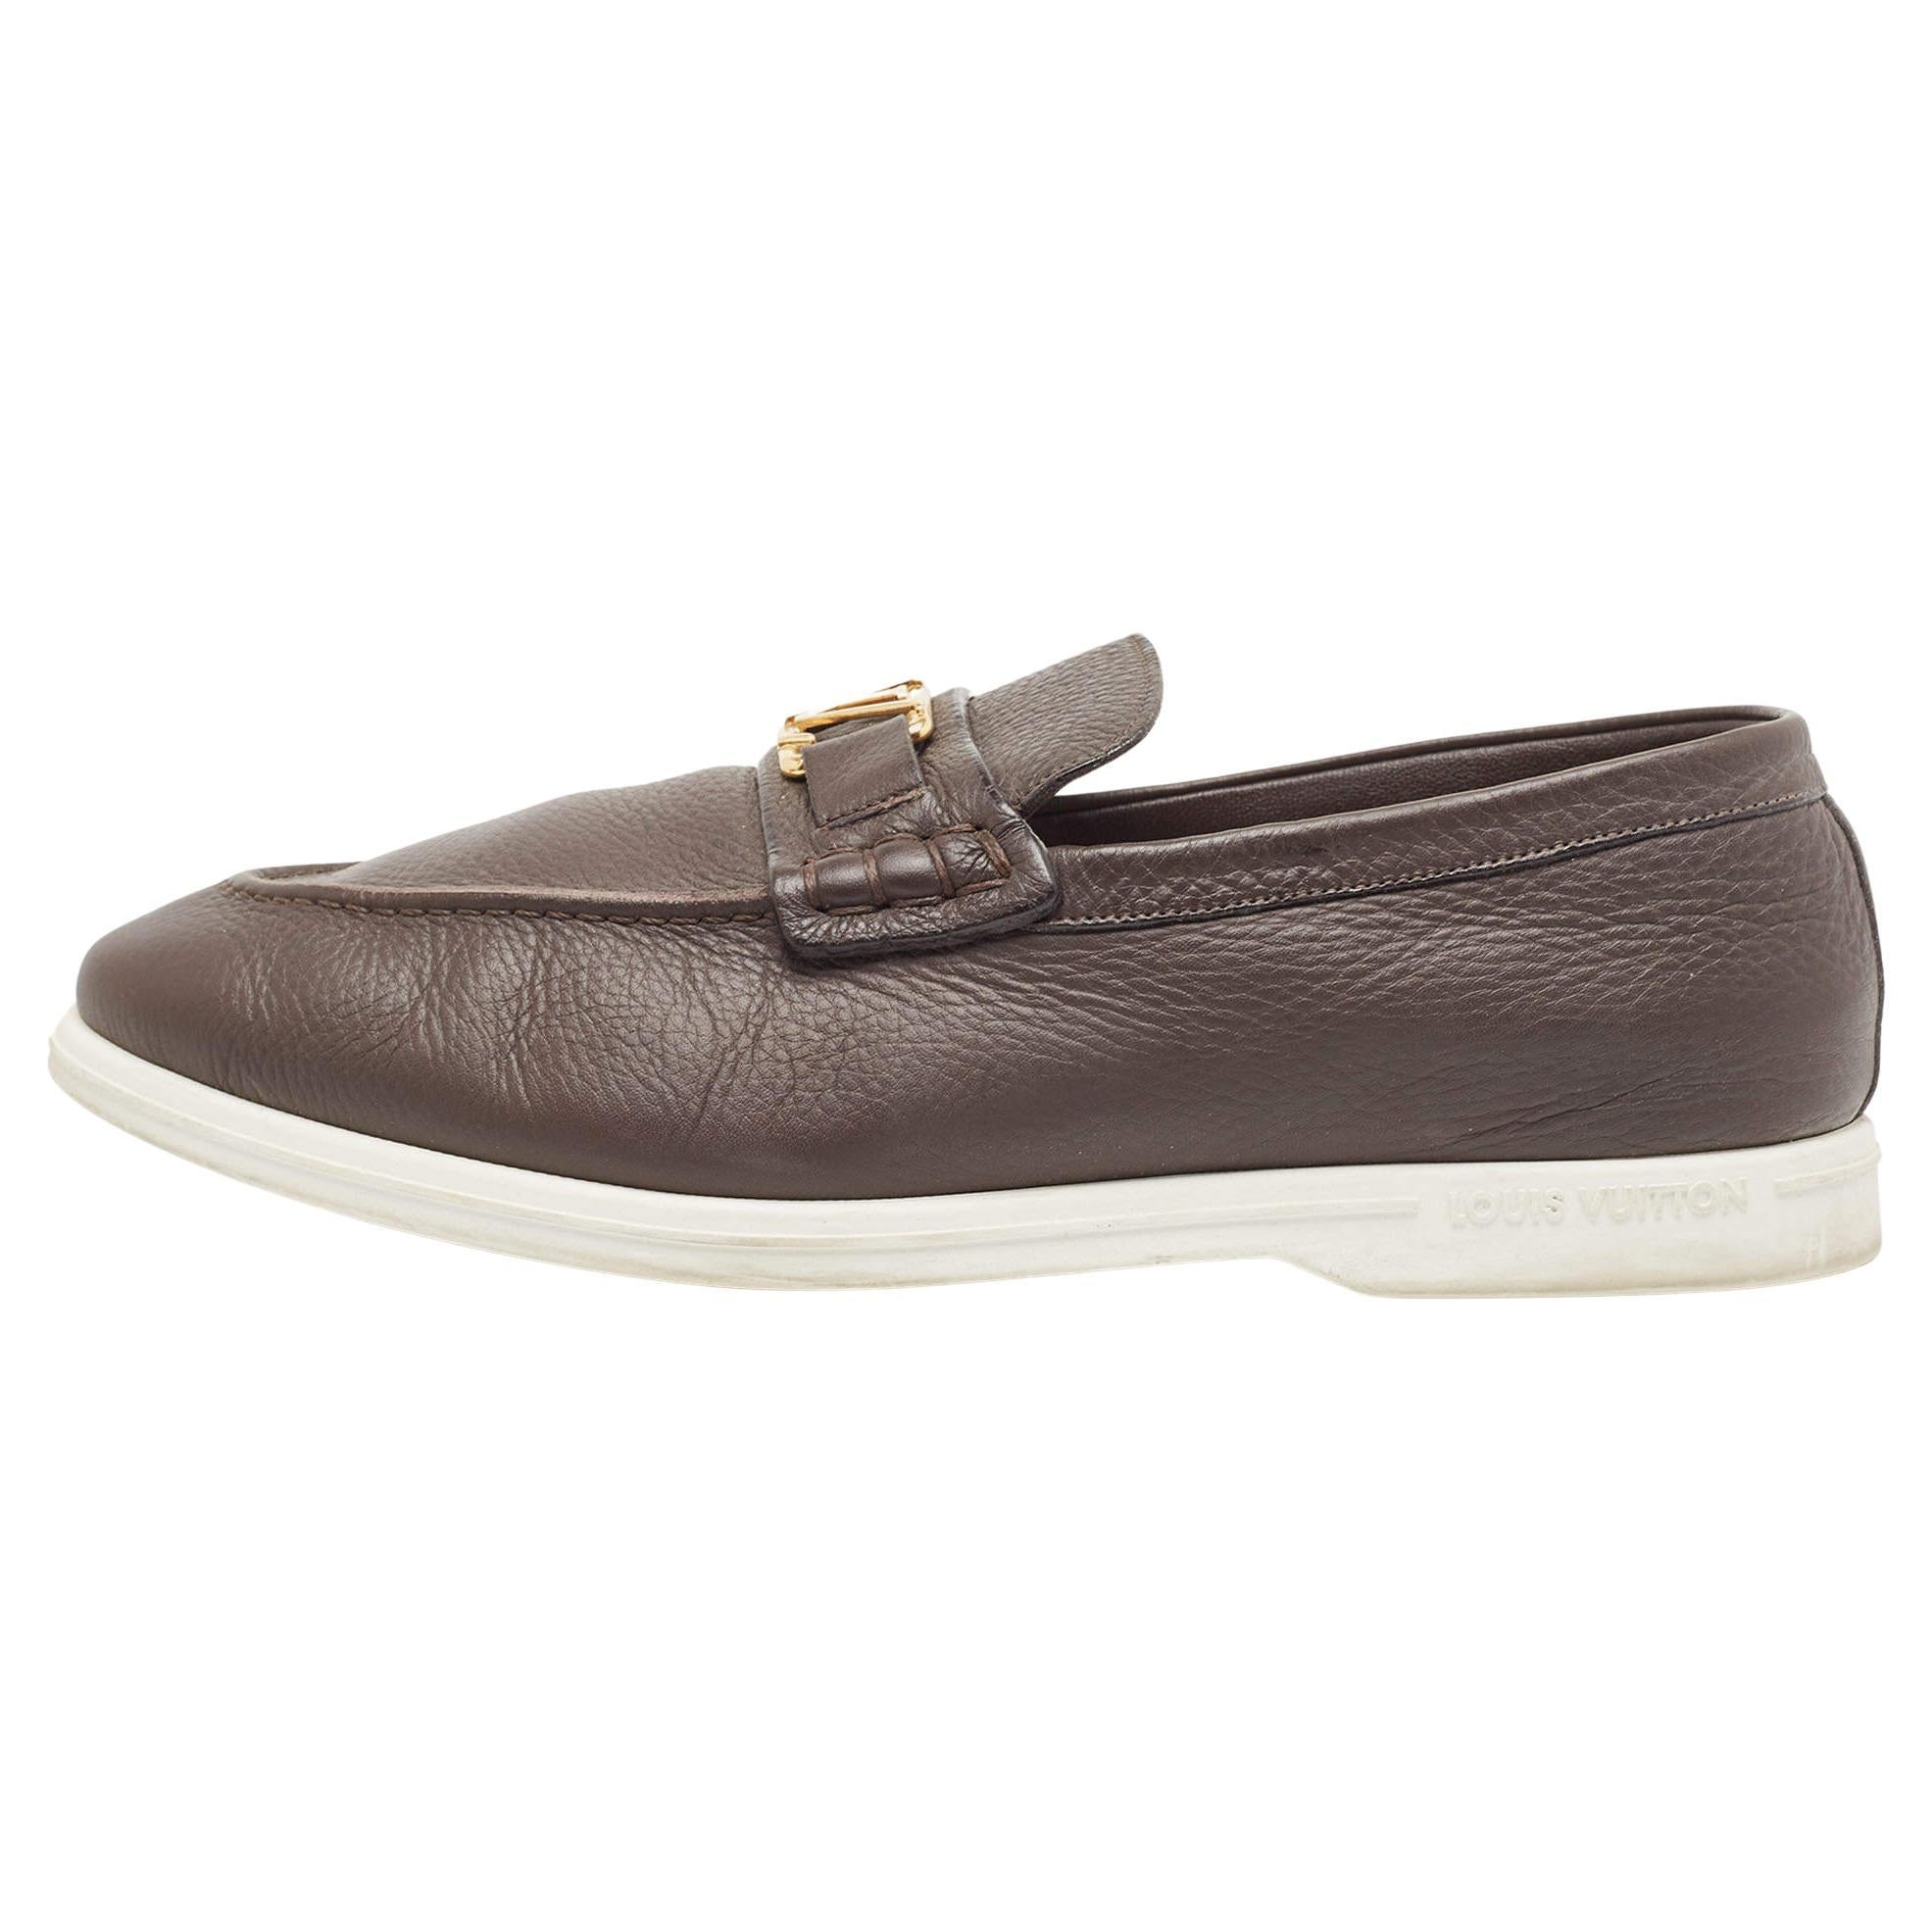 Louis Vuitton Brown Leather Slip On Loafers Size 41.5 For Sale